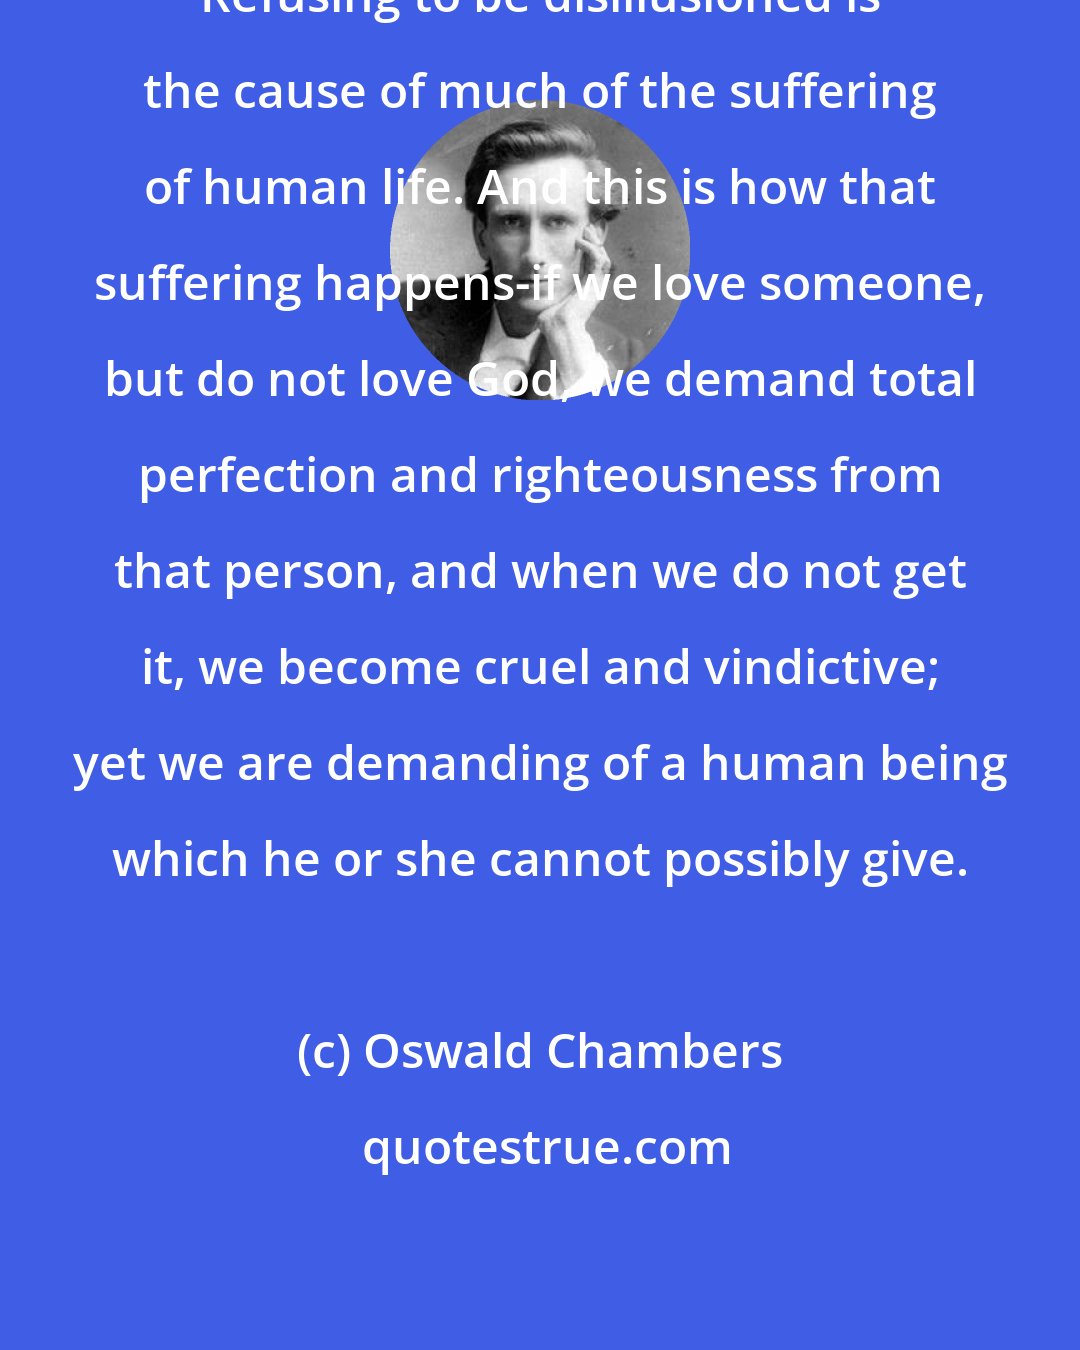 Oswald Chambers: Refusing to be disillusioned is the cause of much of the suffering of human life. And this is how that suffering happens-if we love someone, but do not love God, we demand total perfection and righteousness from that person, and when we do not get it, we become cruel and vindictive; yet we are demanding of a human being which he or she cannot possibly give.